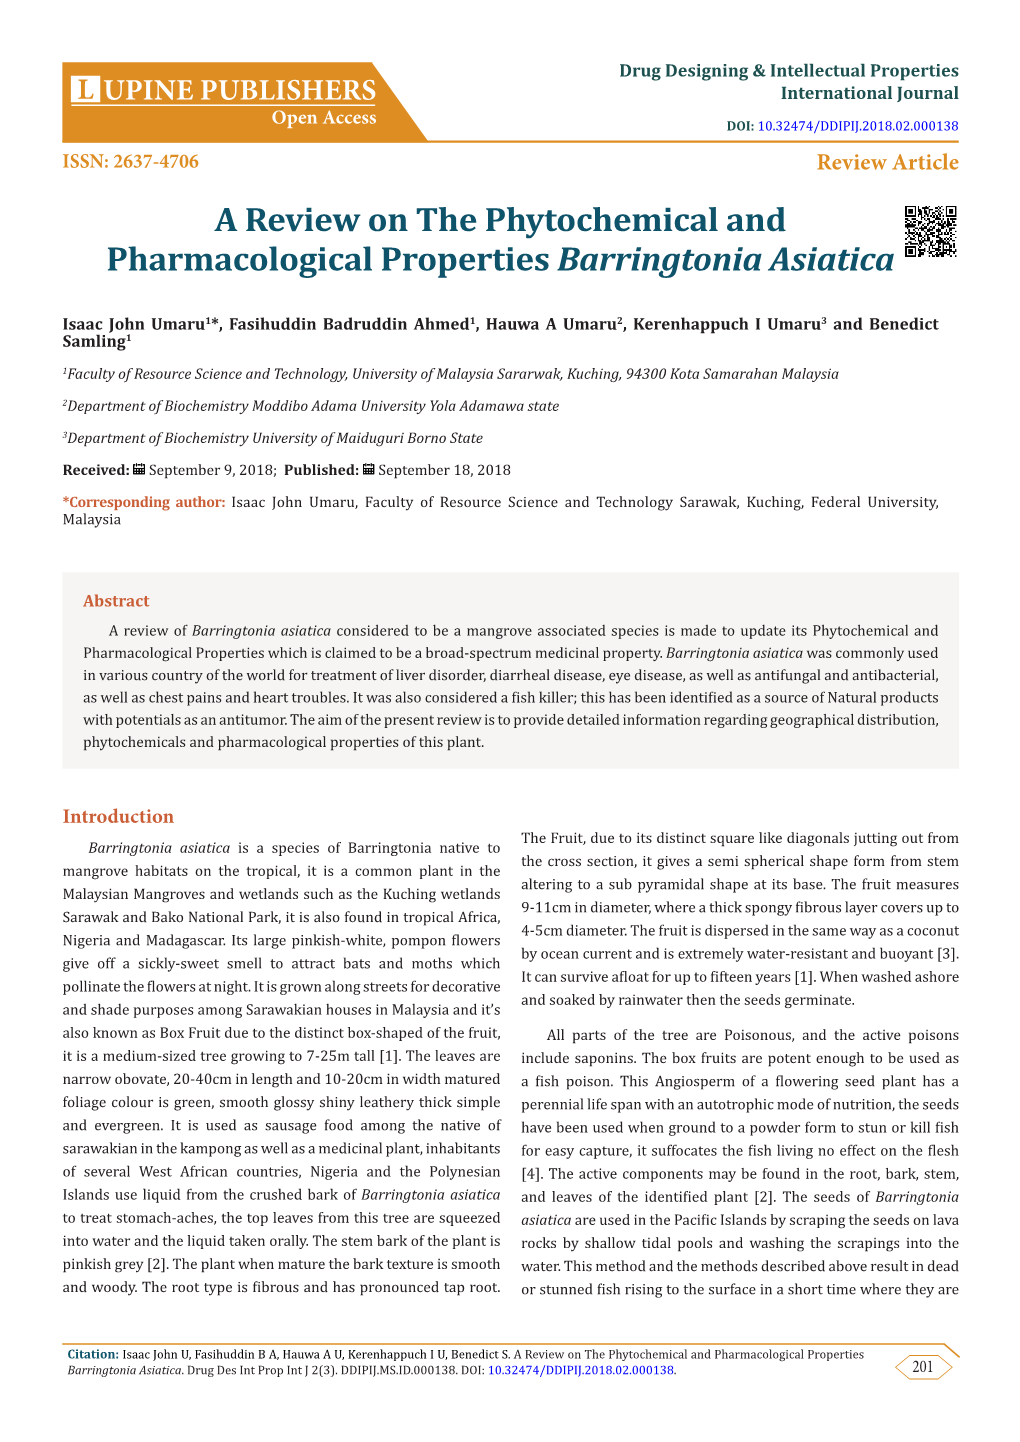 A Review on the Phytochemical and Pharmacological Properties Barringtonia Asiatica